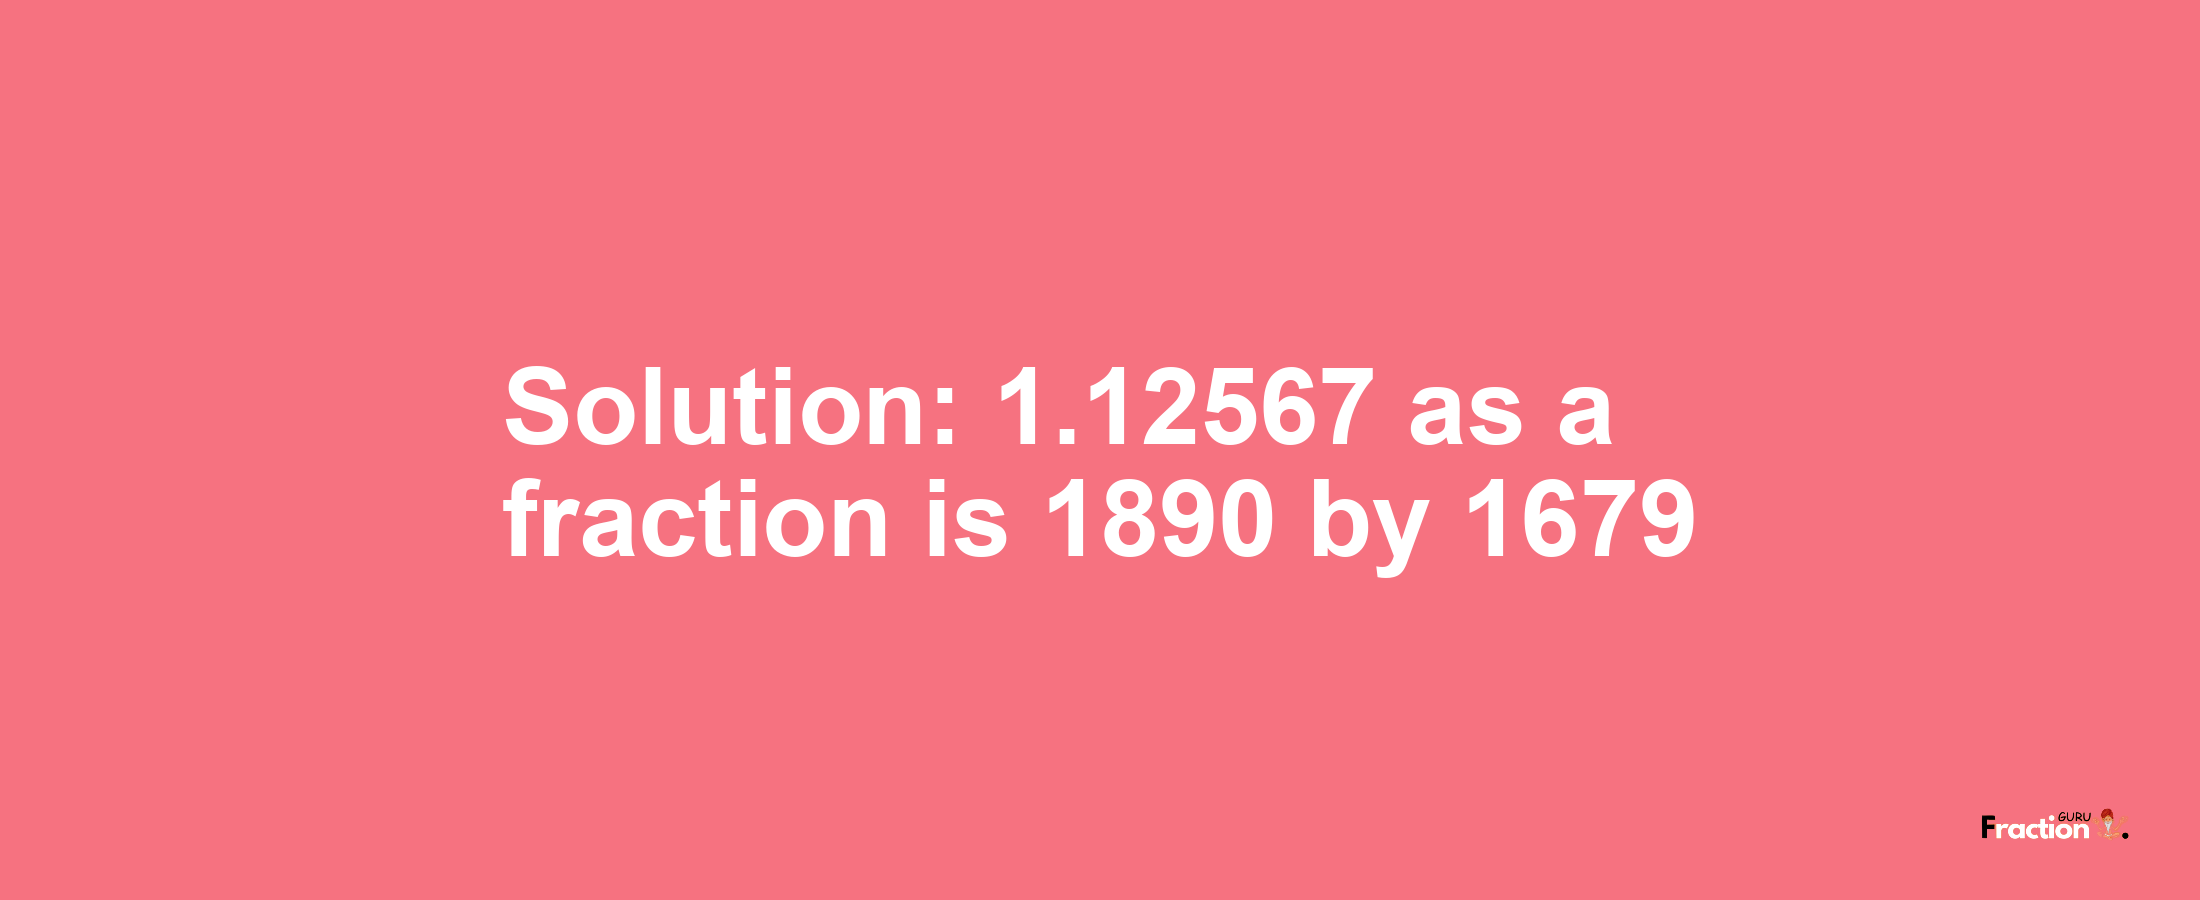 Solution:1.12567 as a fraction is 1890/1679